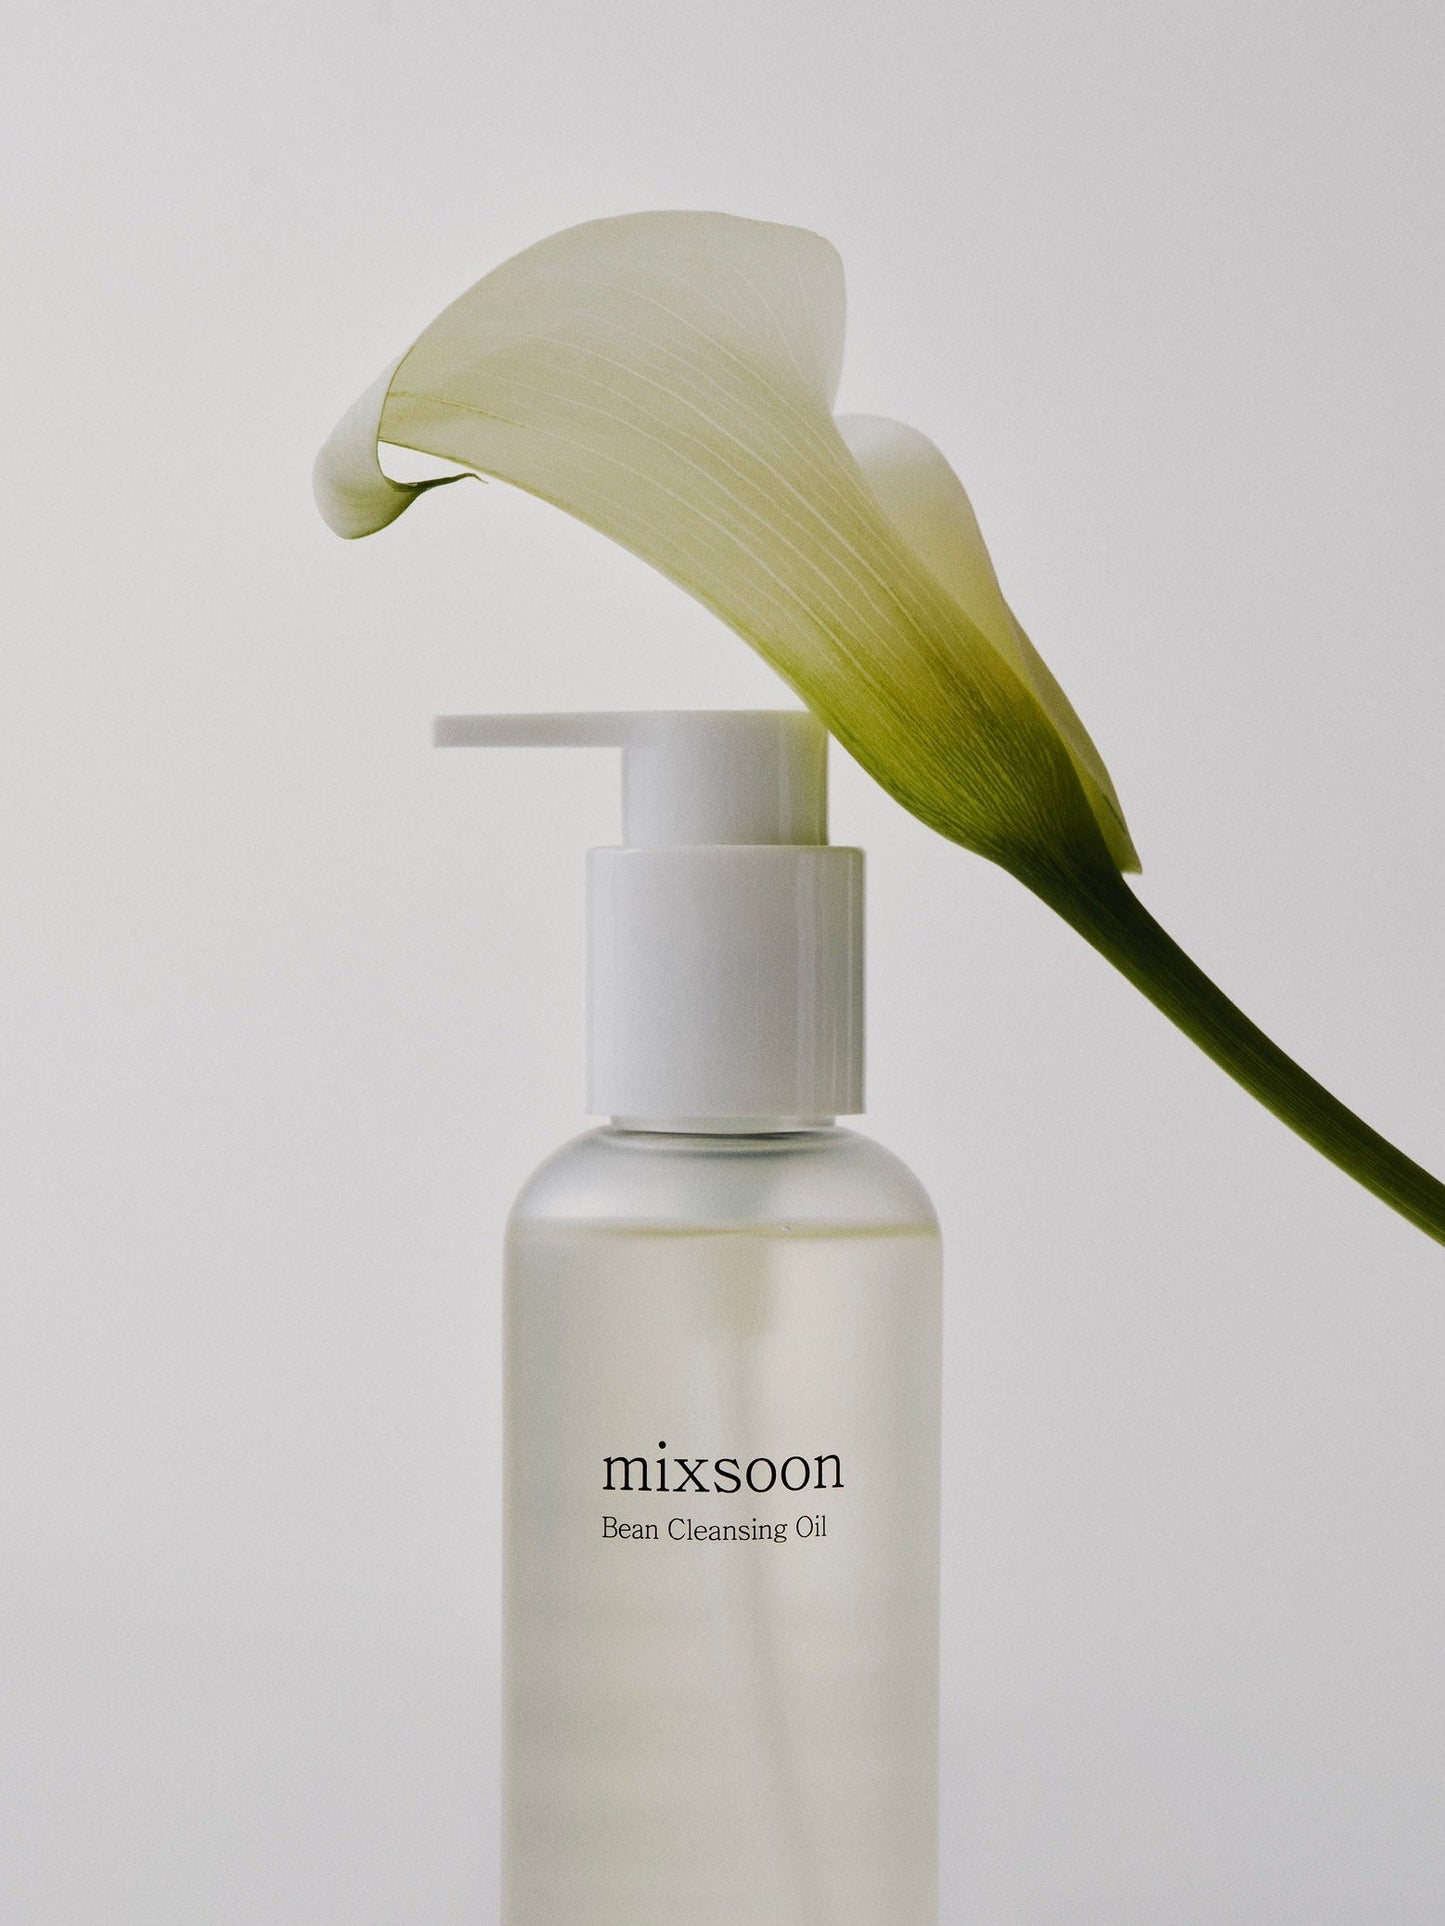 mixsoon Bean Cleansing Oil